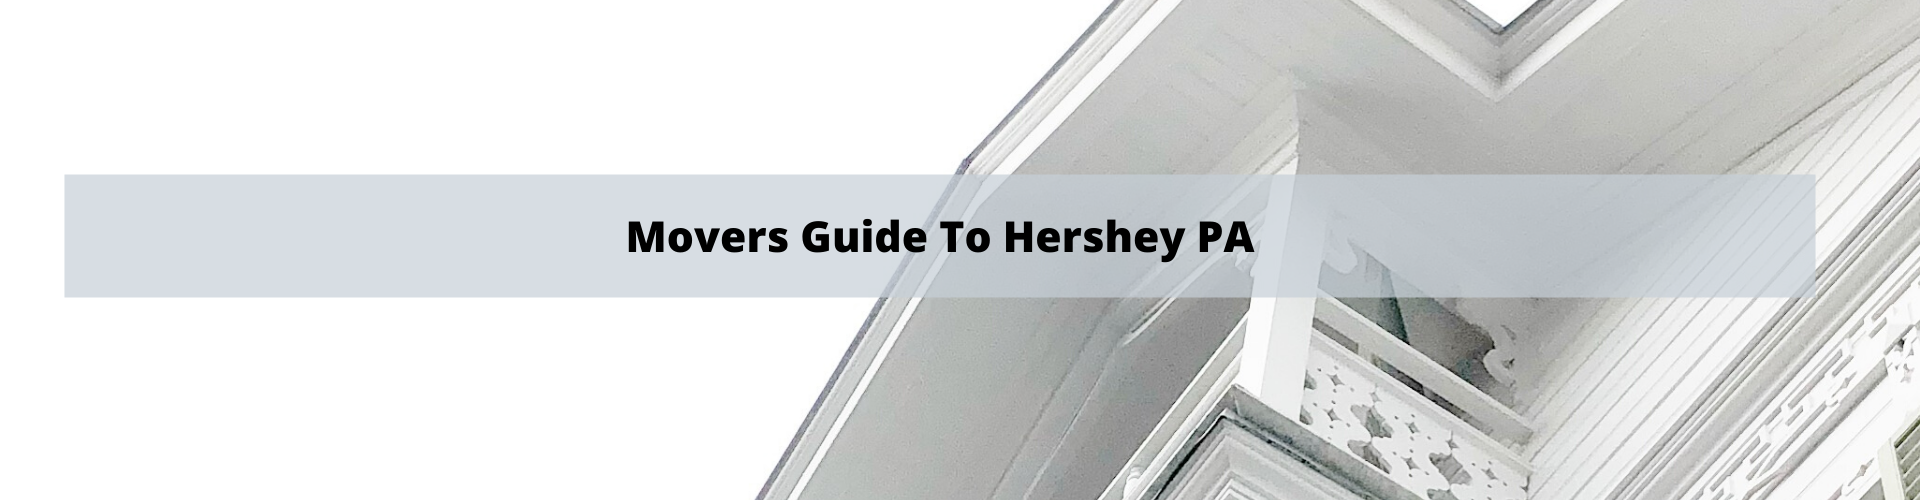 Movers Guide To Hershey PA